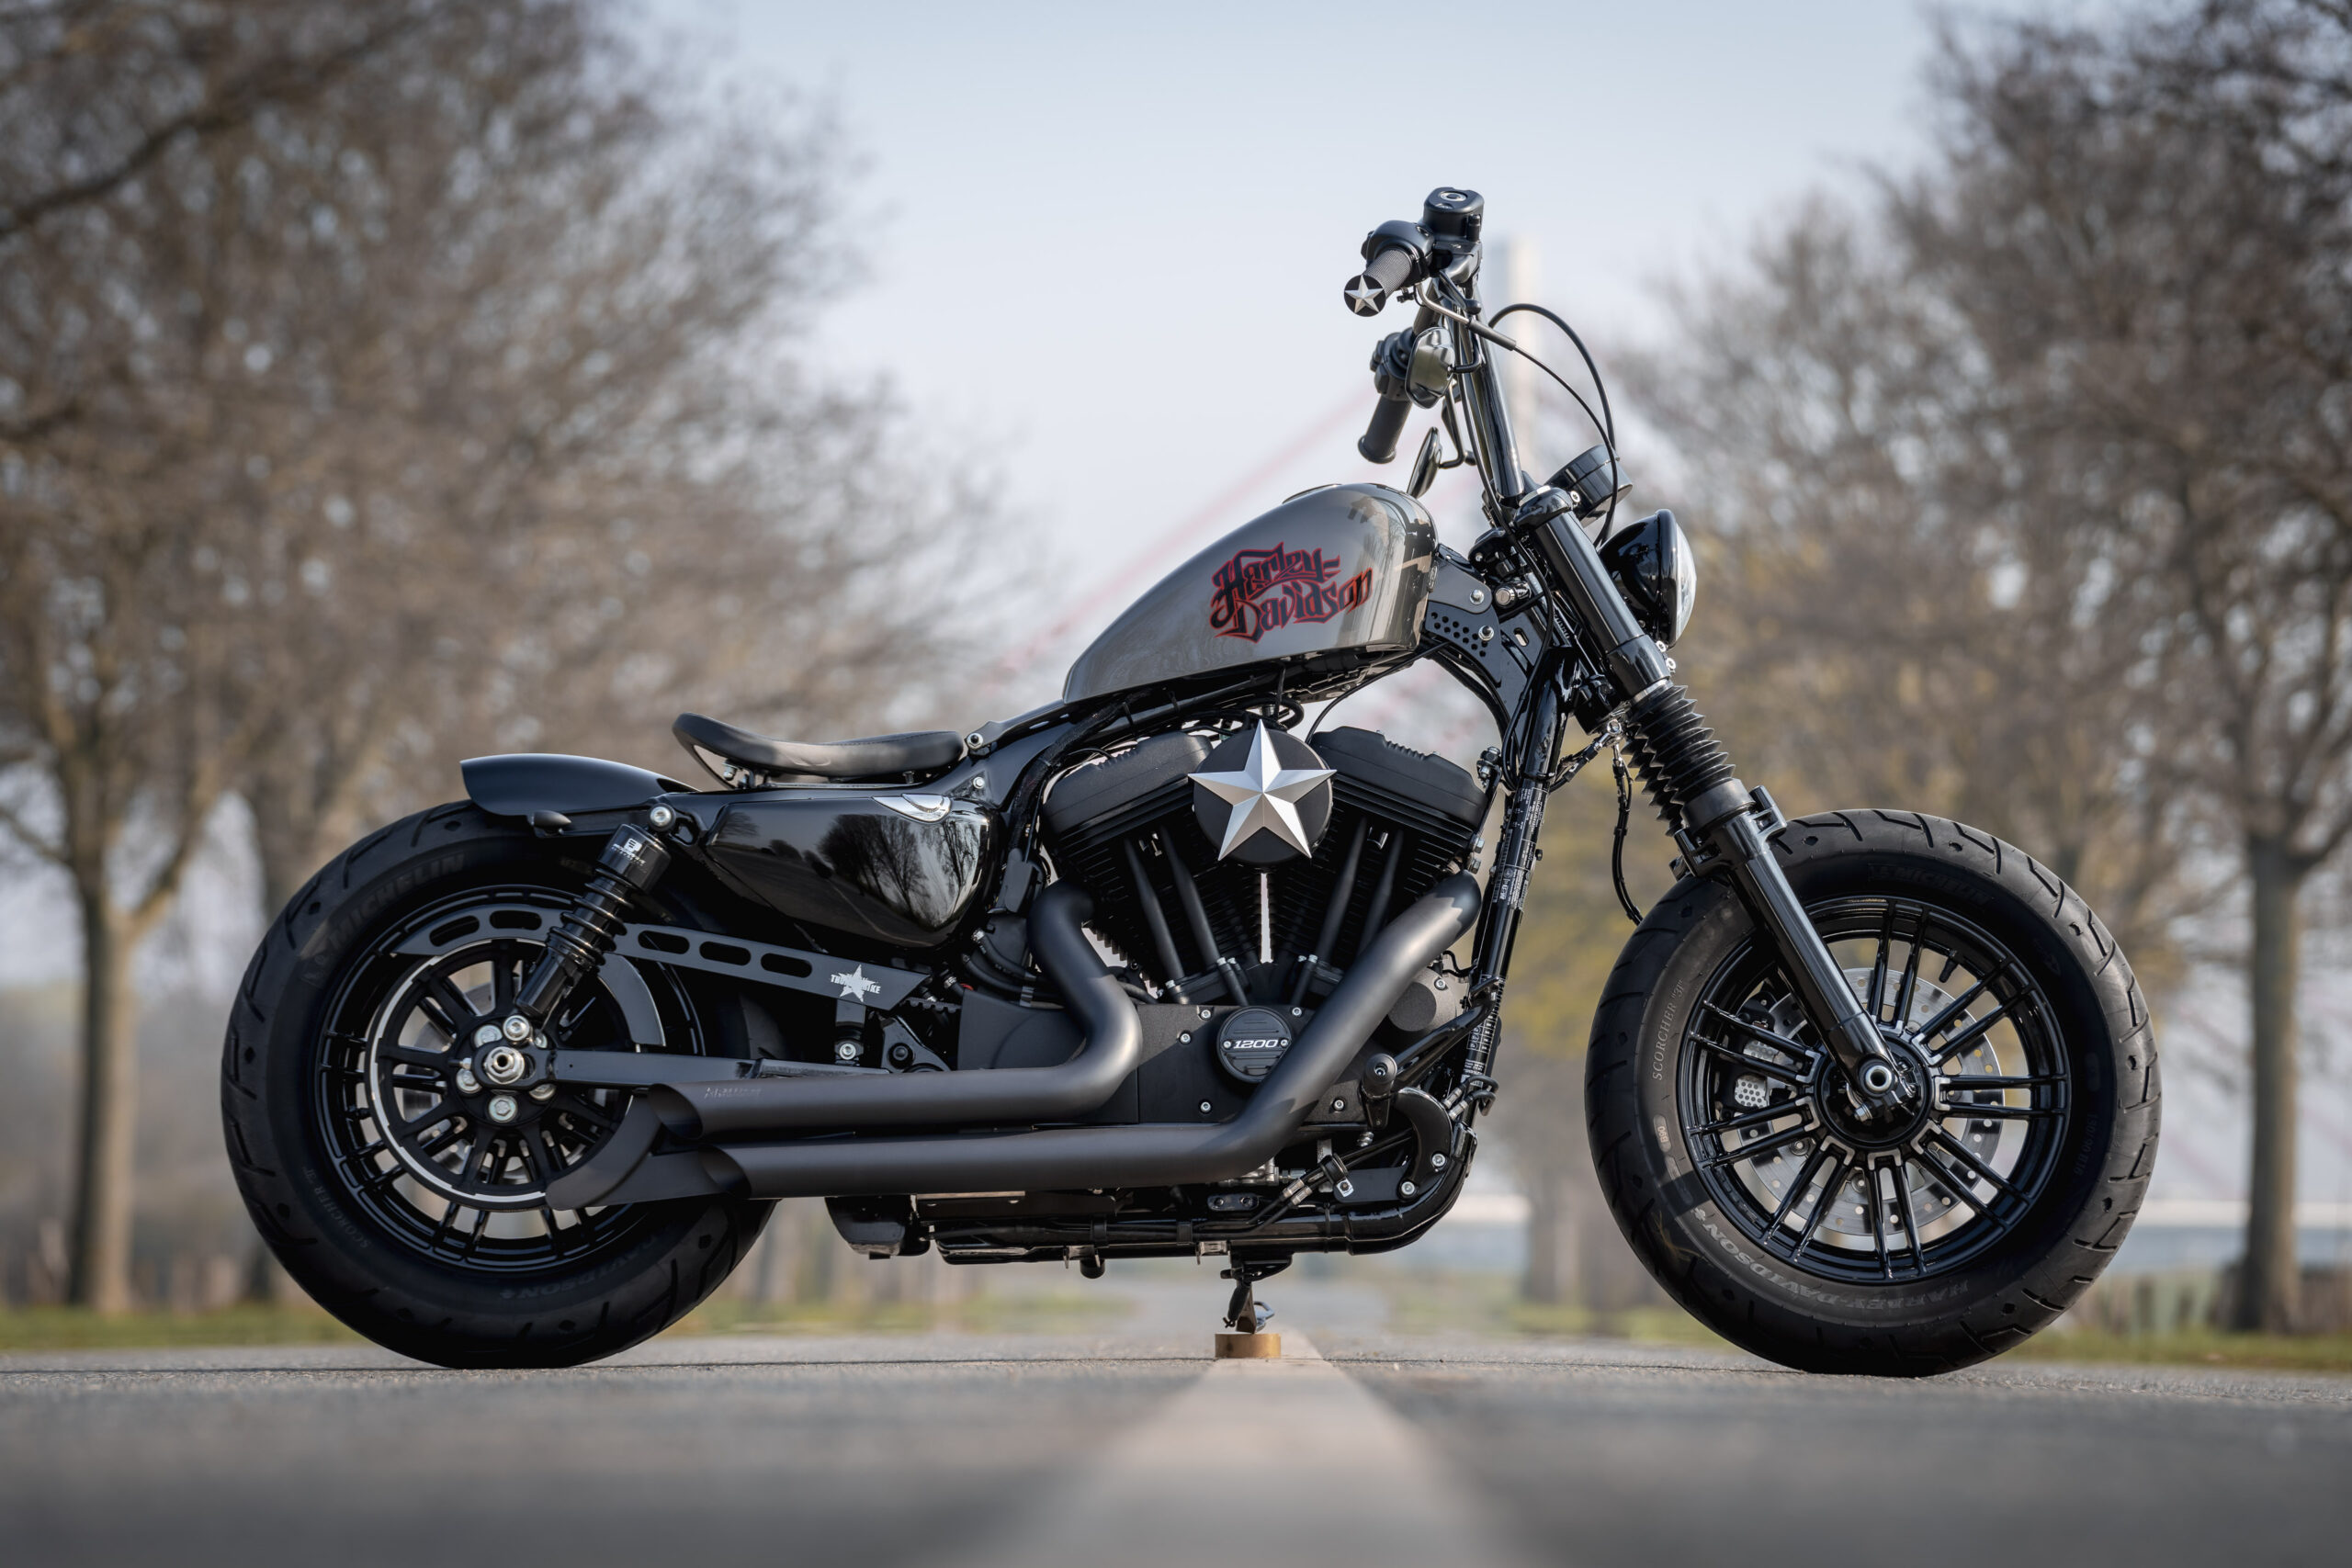 Customized Harley-Davidson Sportster Forty-Eight (48) XL1200X by